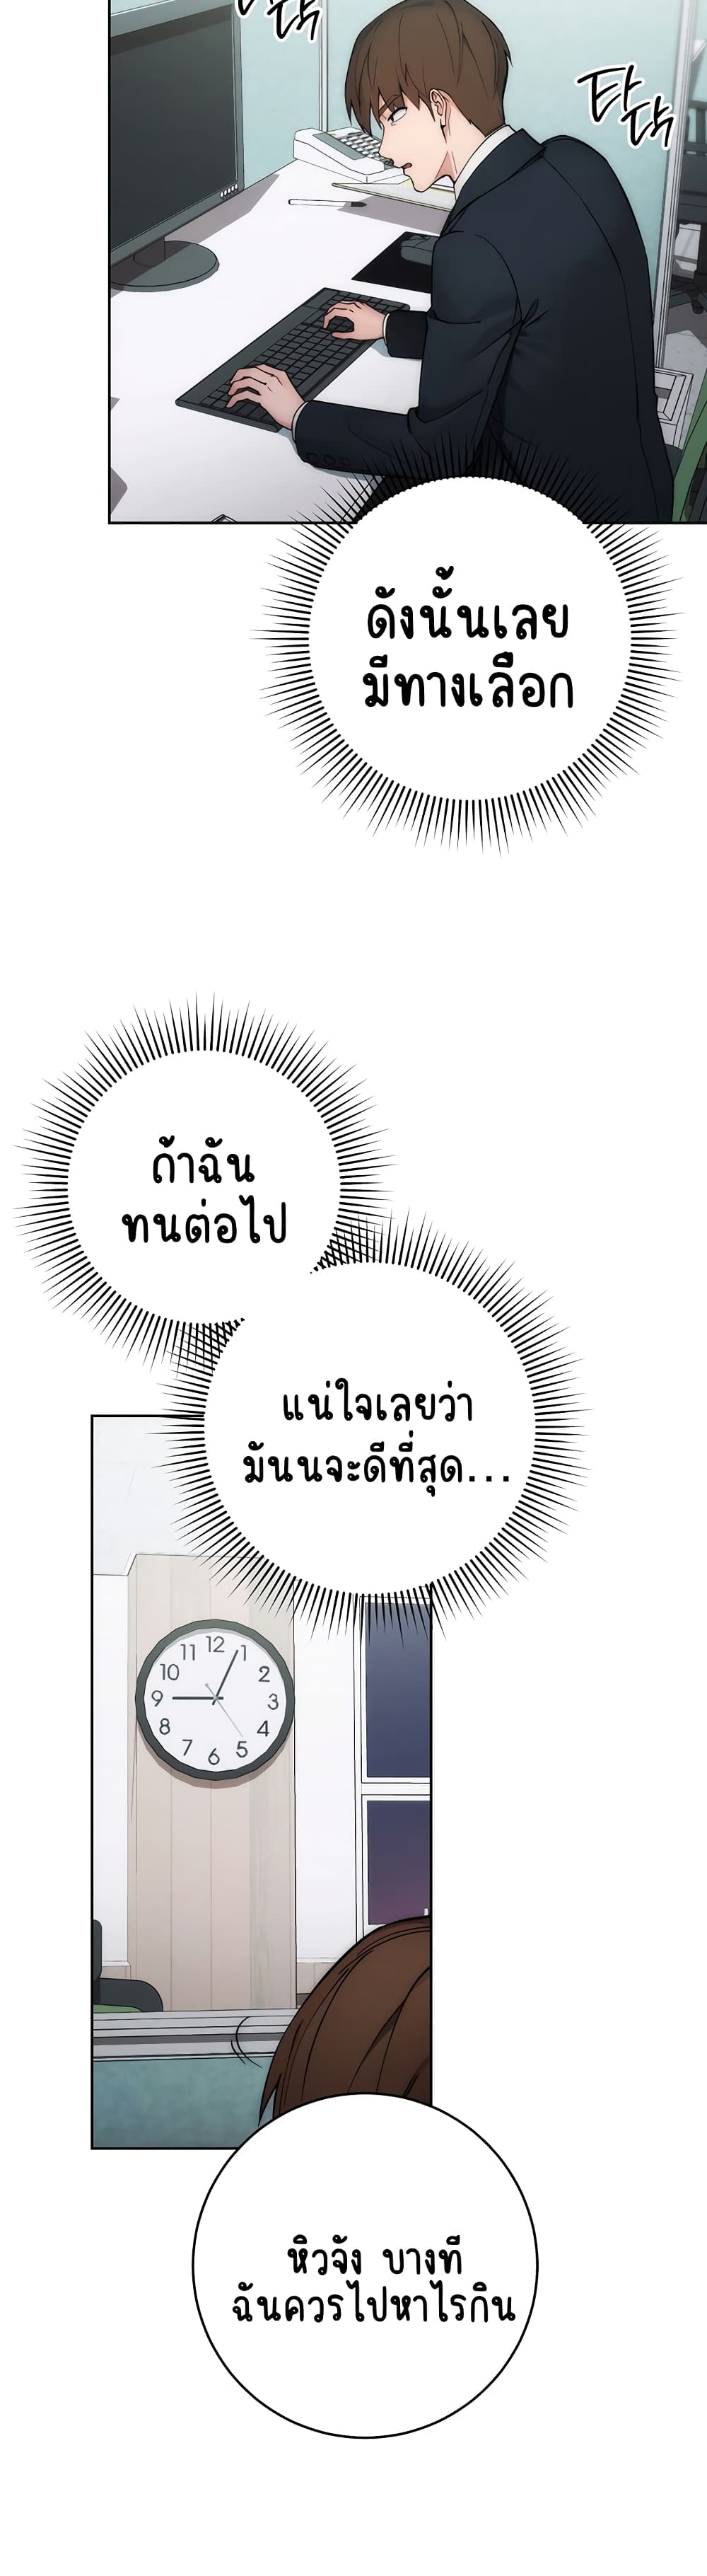 Outsider: The Invisible Man ตอนที่ 1 ภาพ 48